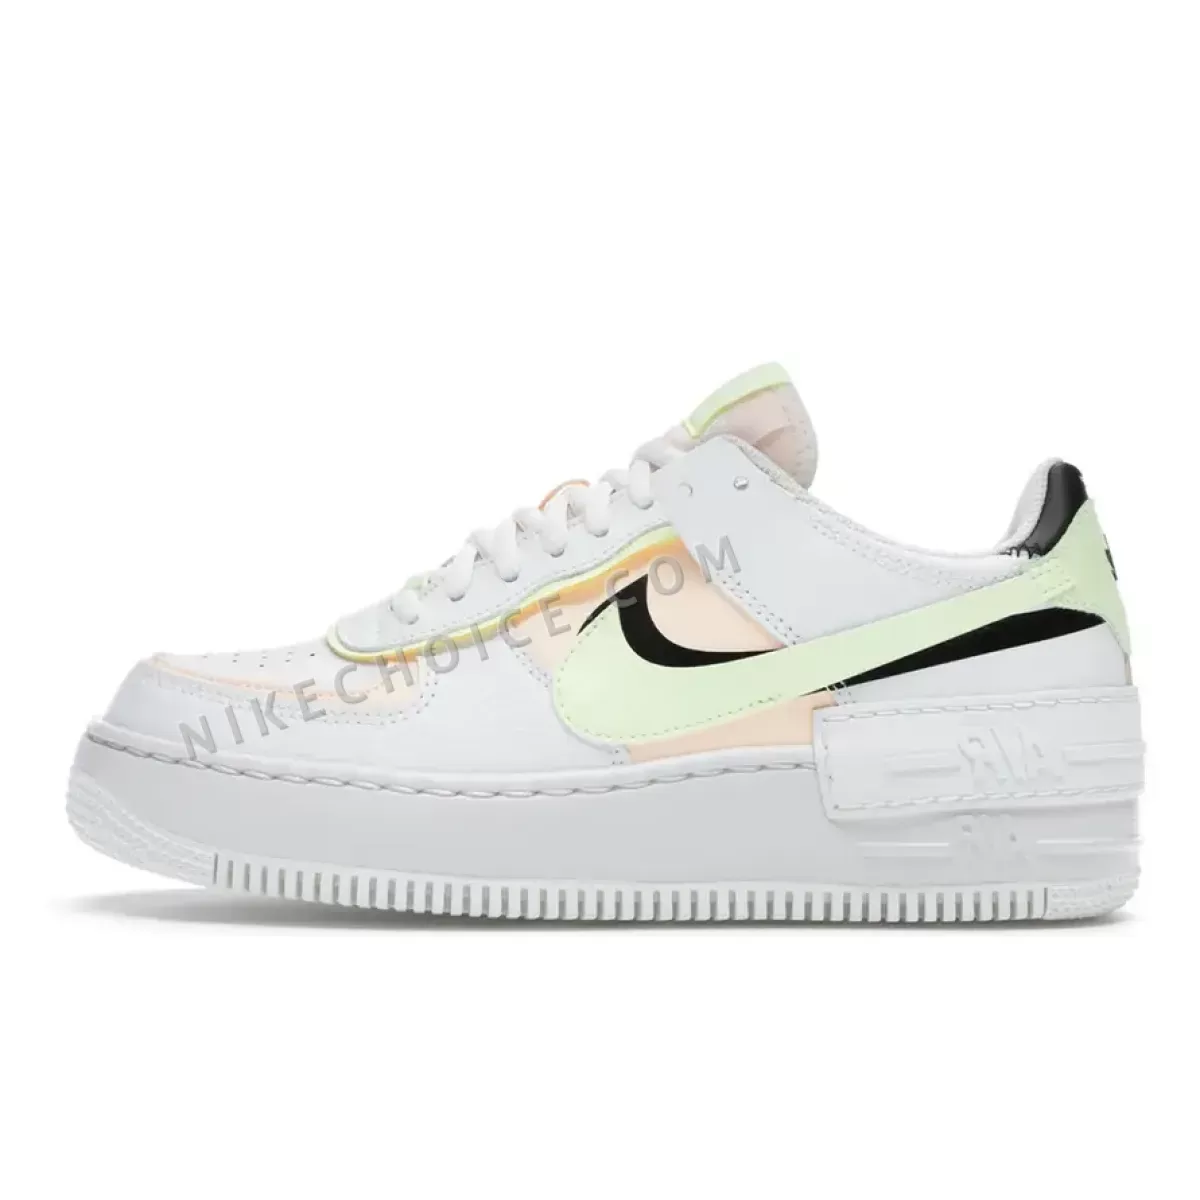 Nike Air Force 1 Shadow White/Black/Barely Volt/Crimson Tint air force 1 crimson tint volt